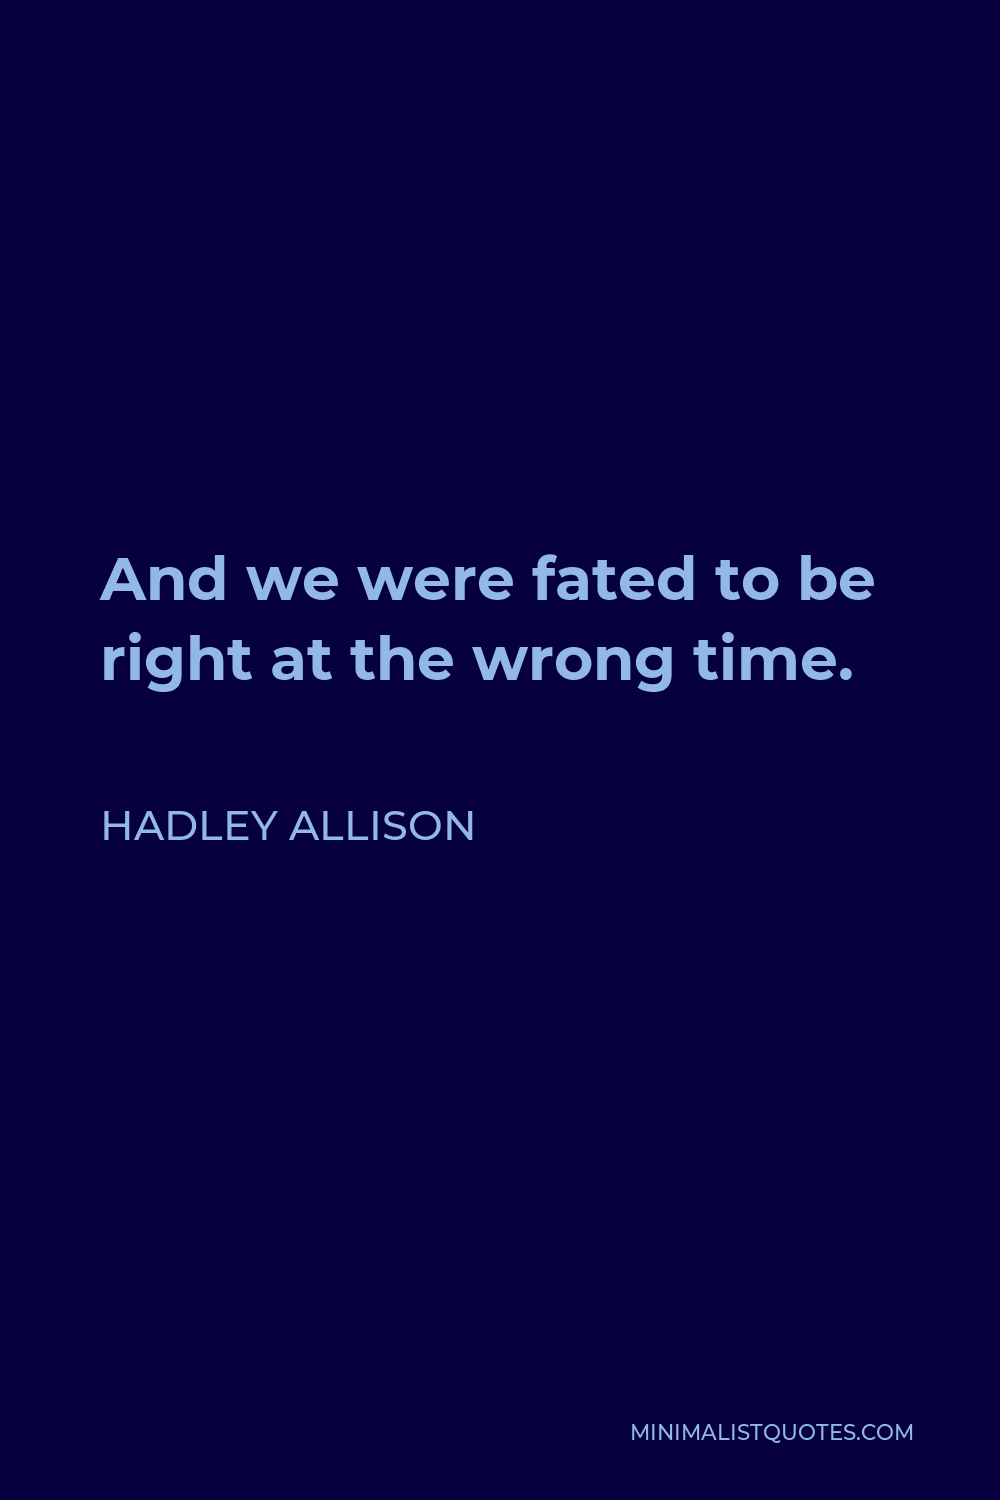 Hadley Allison Quote - And we were fated to be right at the wrong time.